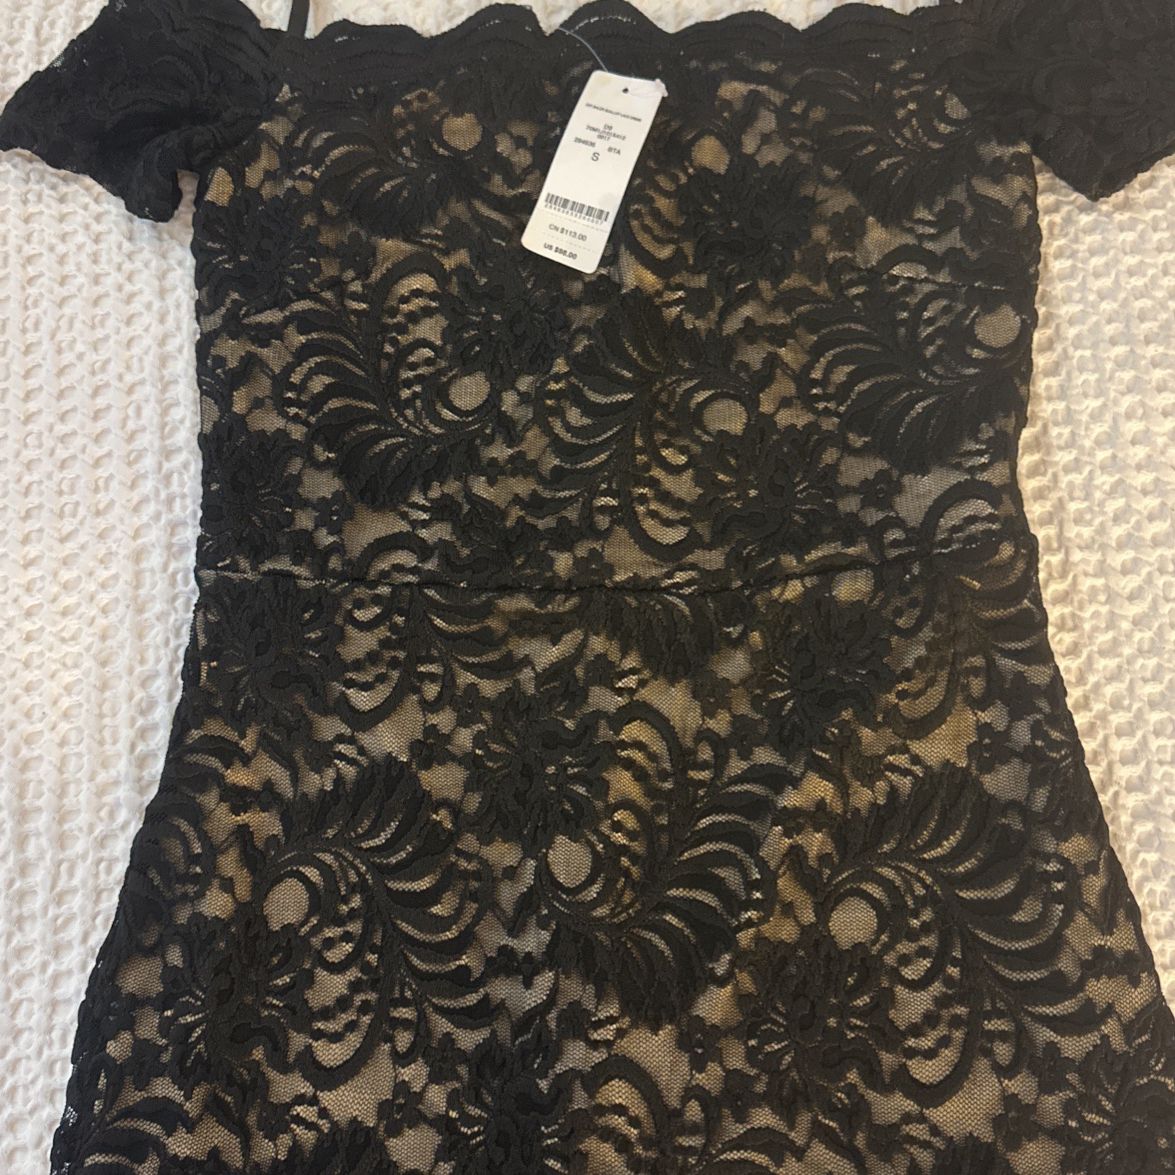 Bebe Lace Party Dress - Small